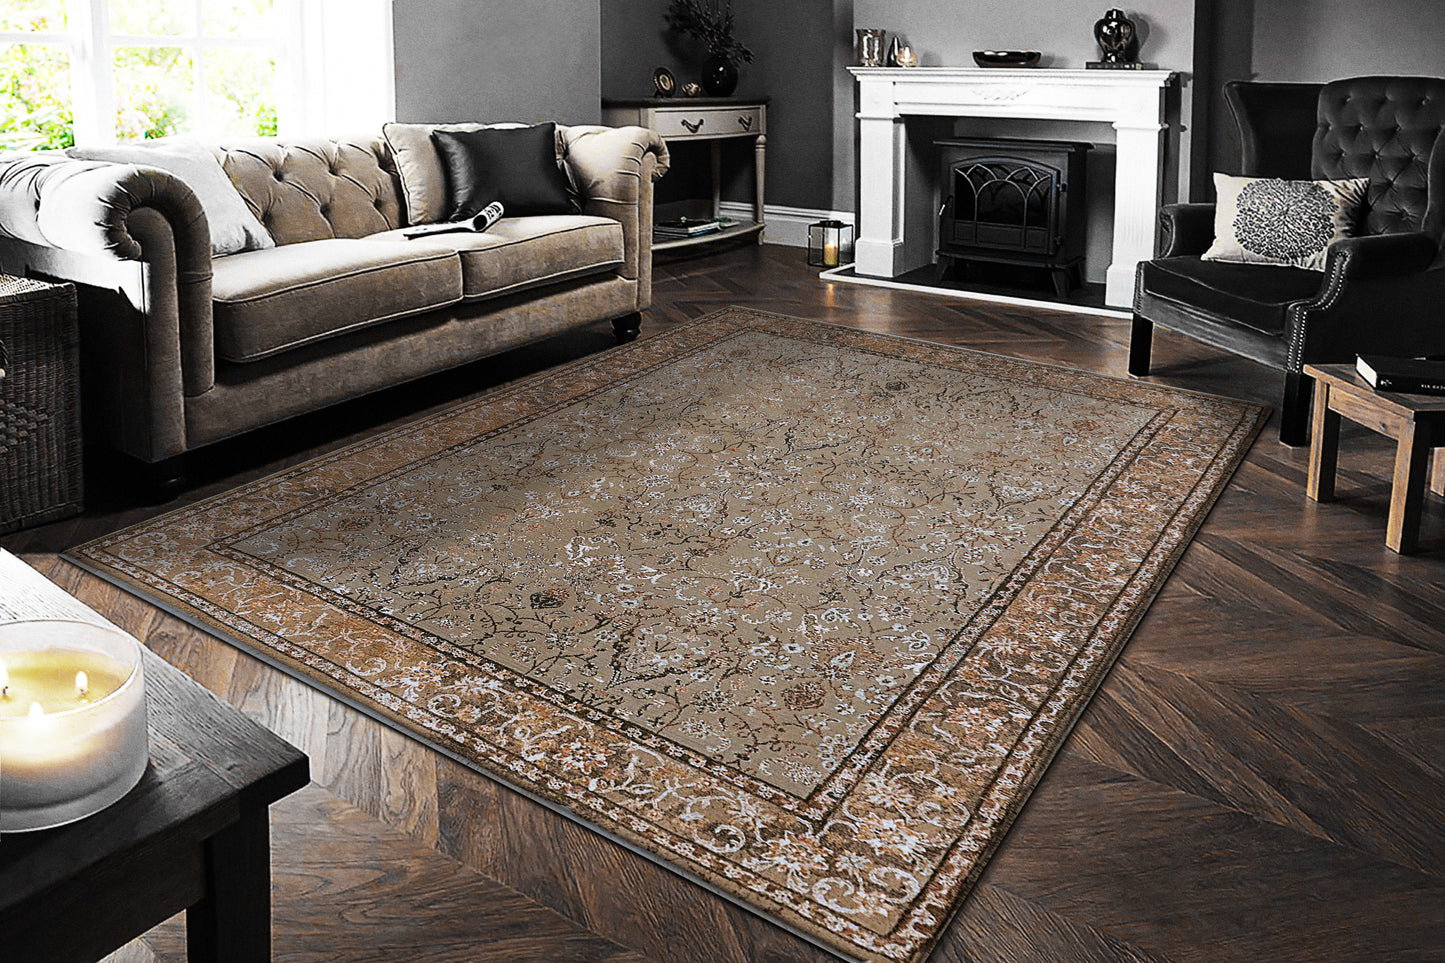 Dynamic Rugs Cullen 5705-800 Taupe/Brown Area Rug